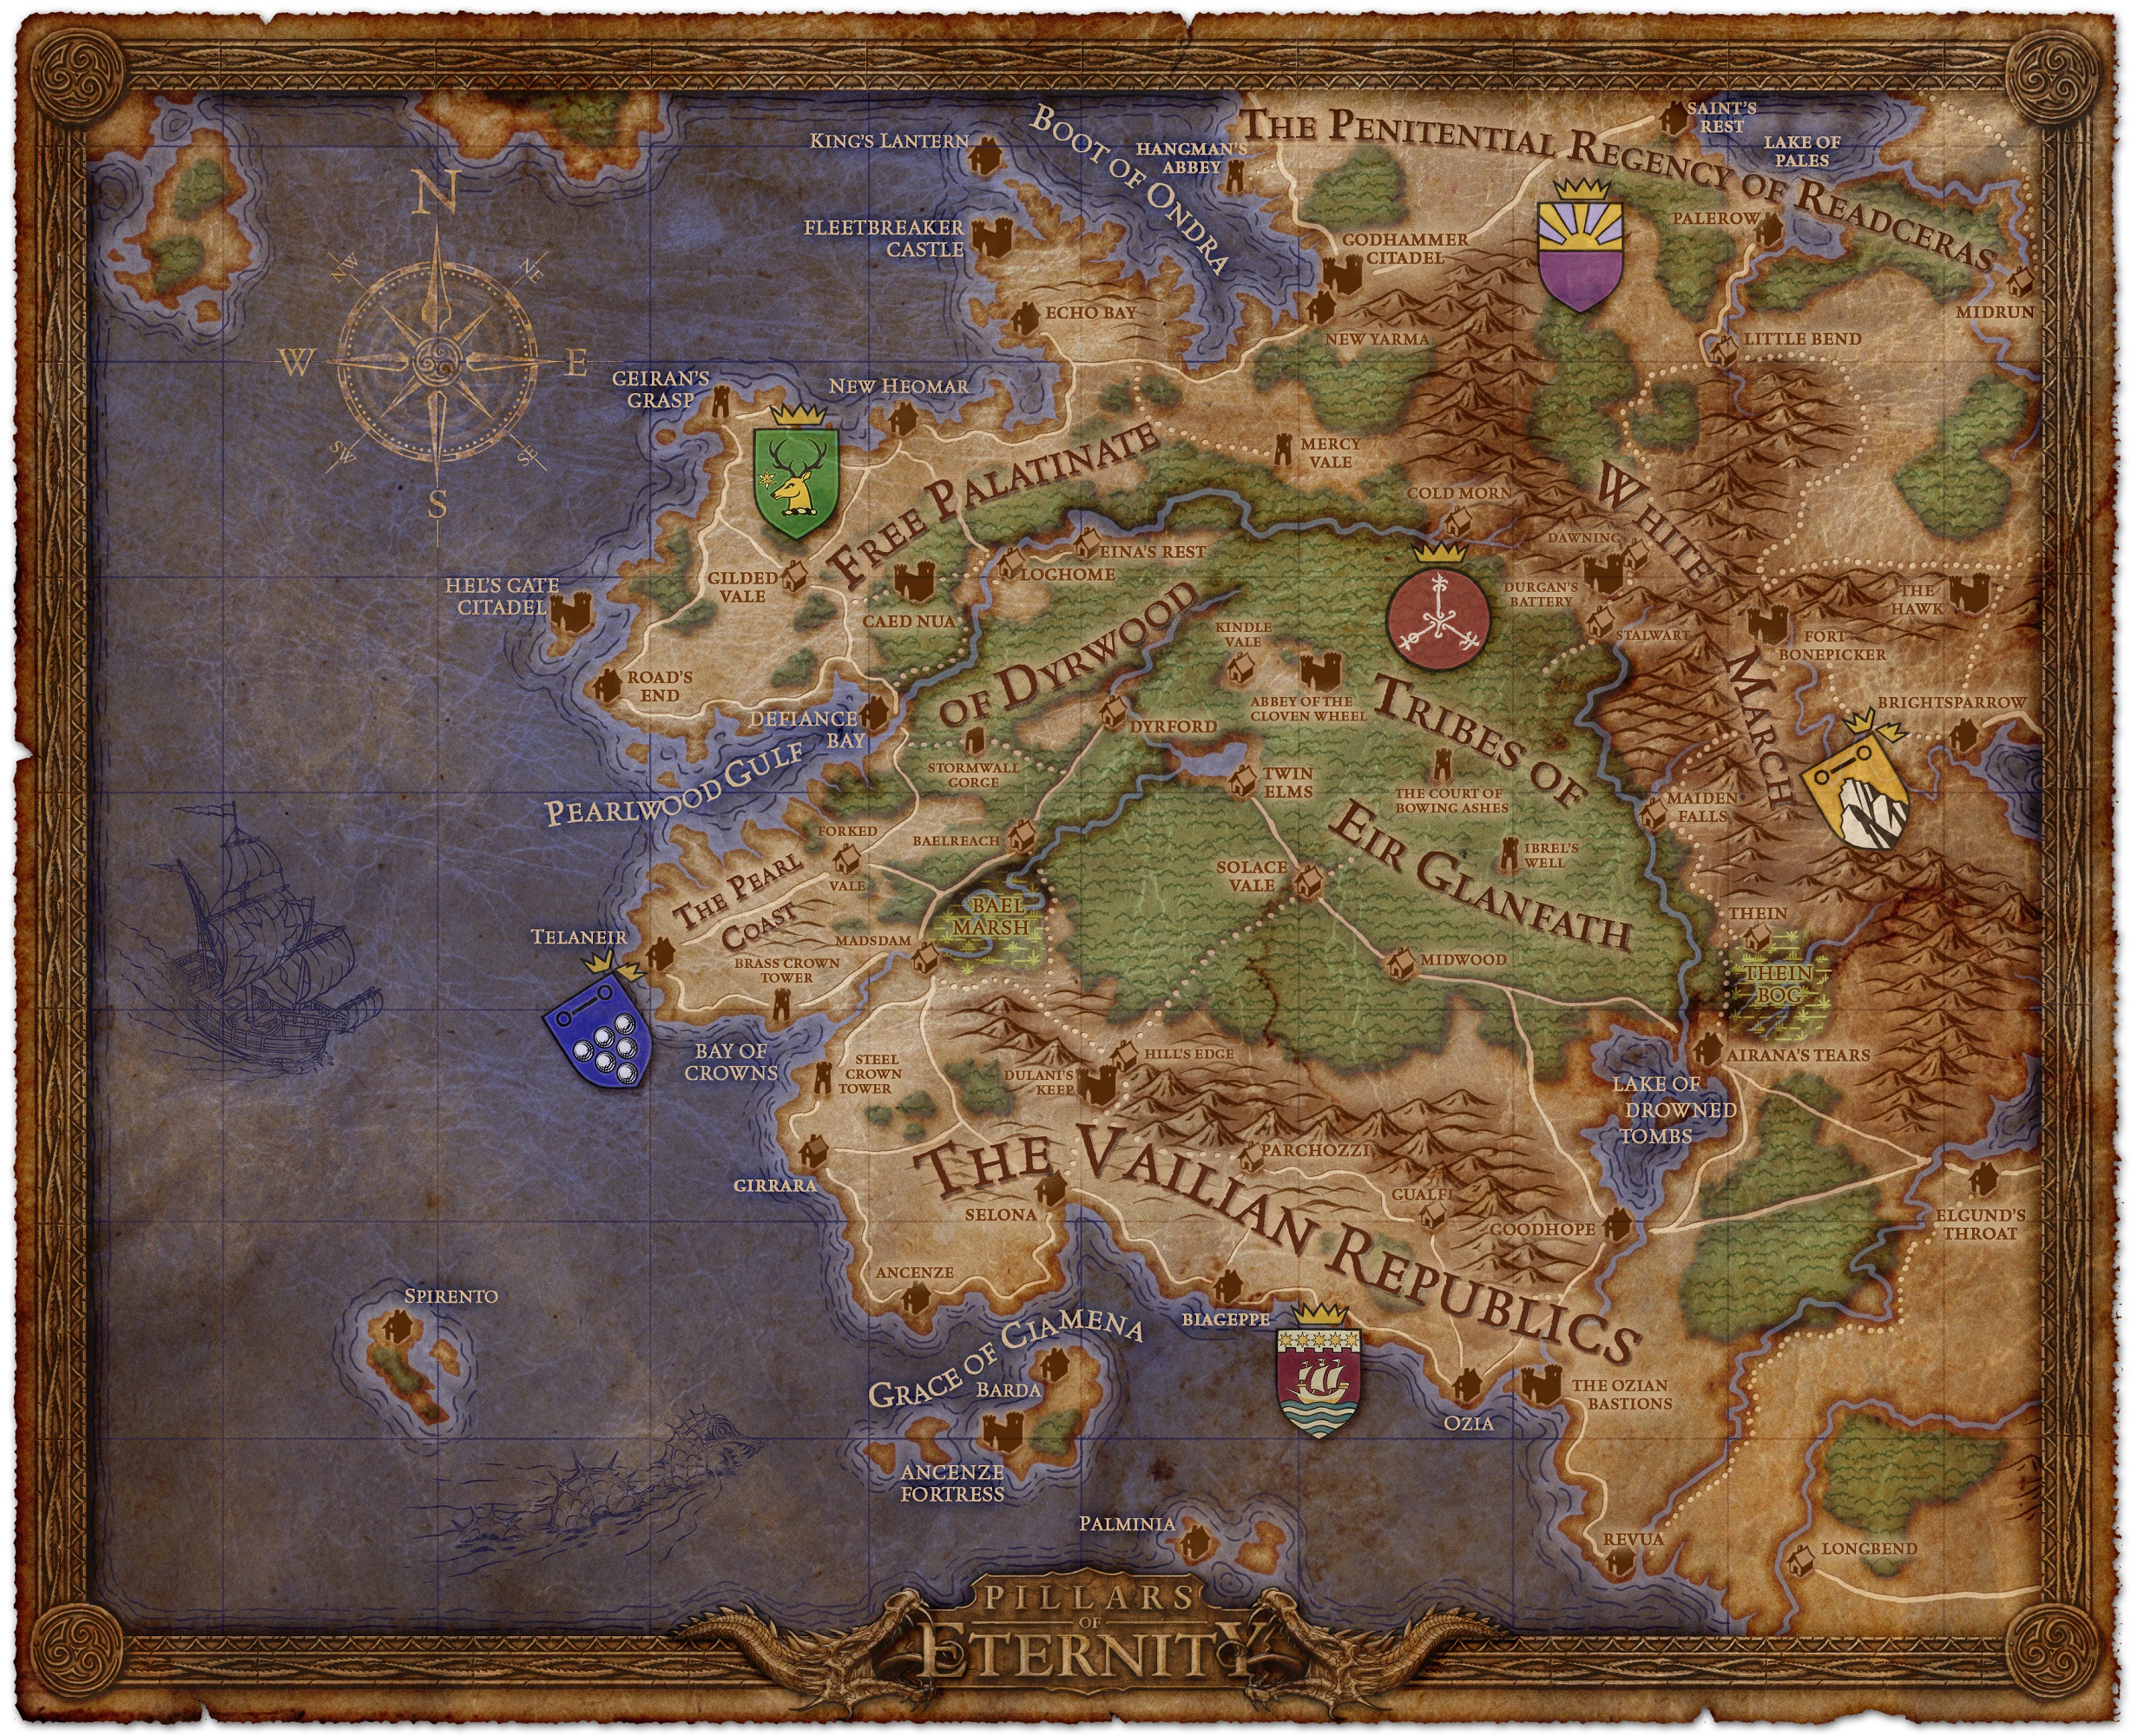 pillars of eternity map - Got Of Ondra He Penitential Recency Recency Oe Readceras Swami Pub, The Penitential Res Wheel Sow Na Free Palatinate Tribes O Of Dyrwoon Of Dat Pearas Gule Er Glanean Cons Ind Vailian Republics Samena Ternit